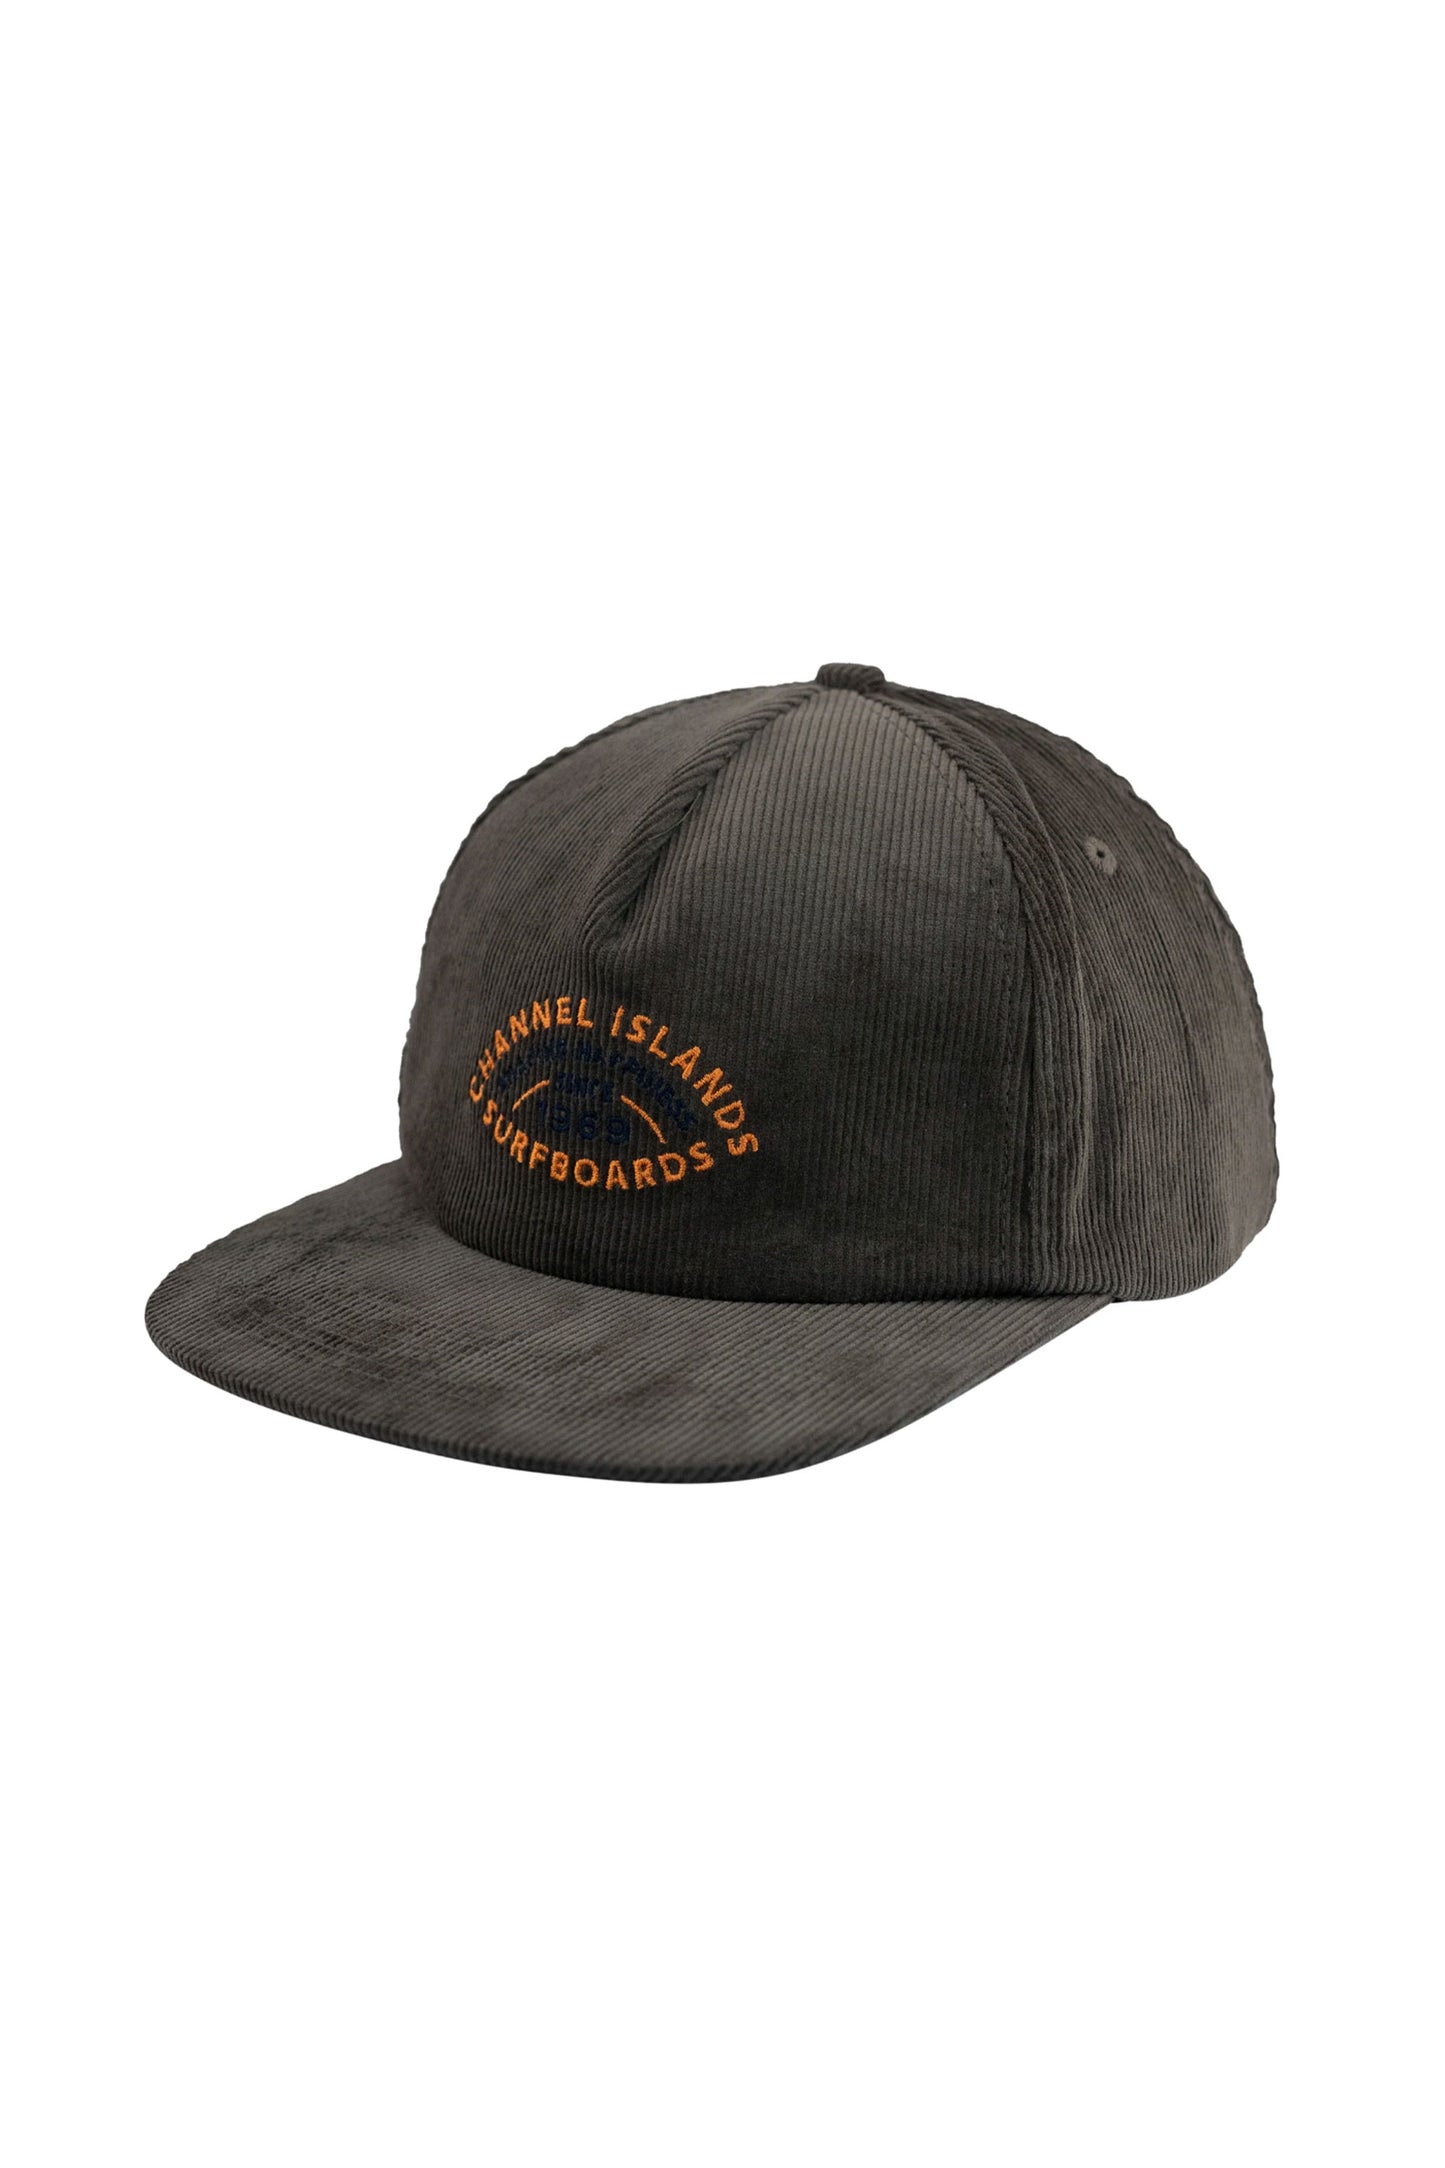 Pukas-Surf-Shop-Channel-Islands-Hat-Shaping-Happiness-Tan